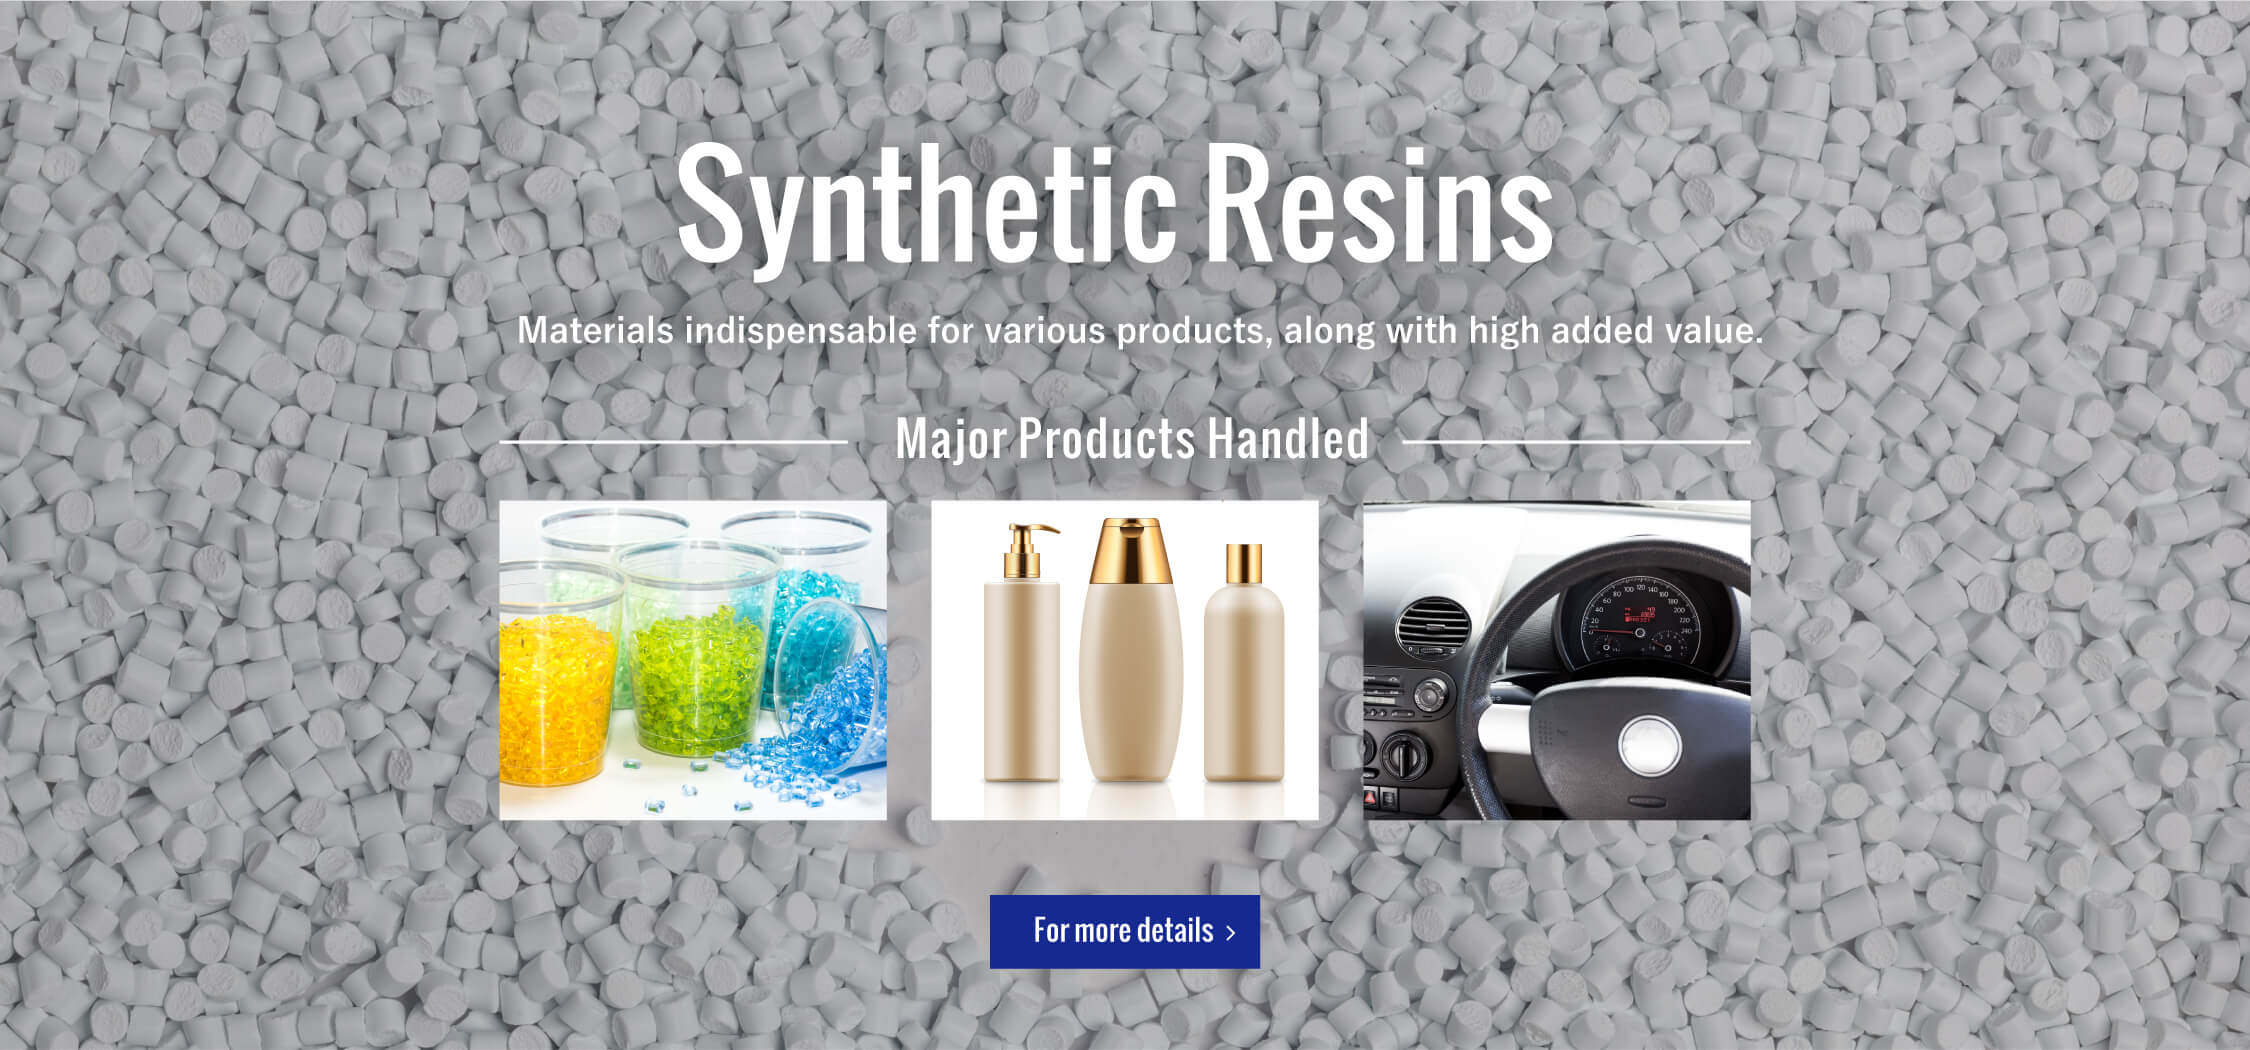 Synthetic Resins